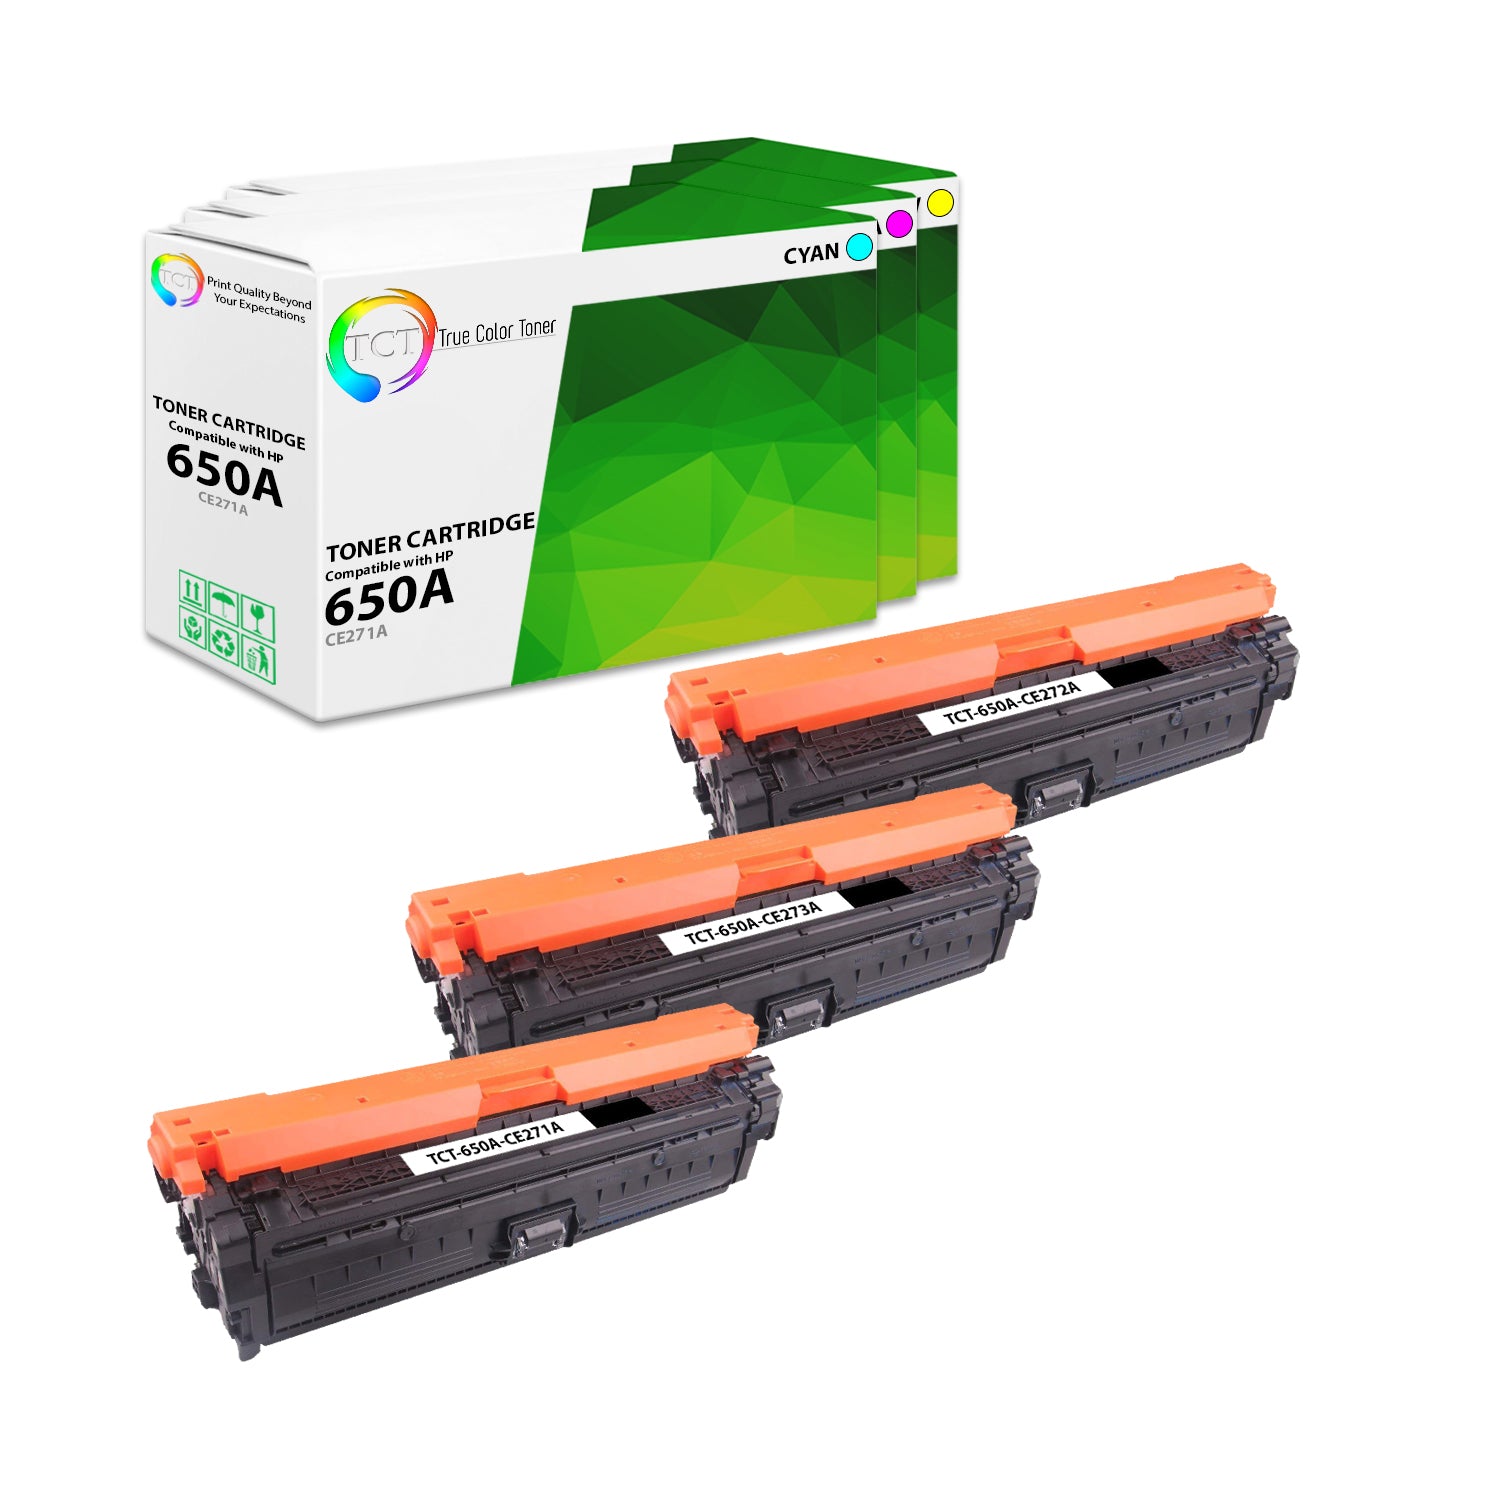 TCT Compatible Toner Cartridge Replacement for the HP 650A Series - 3 Pack (C, M, Y)